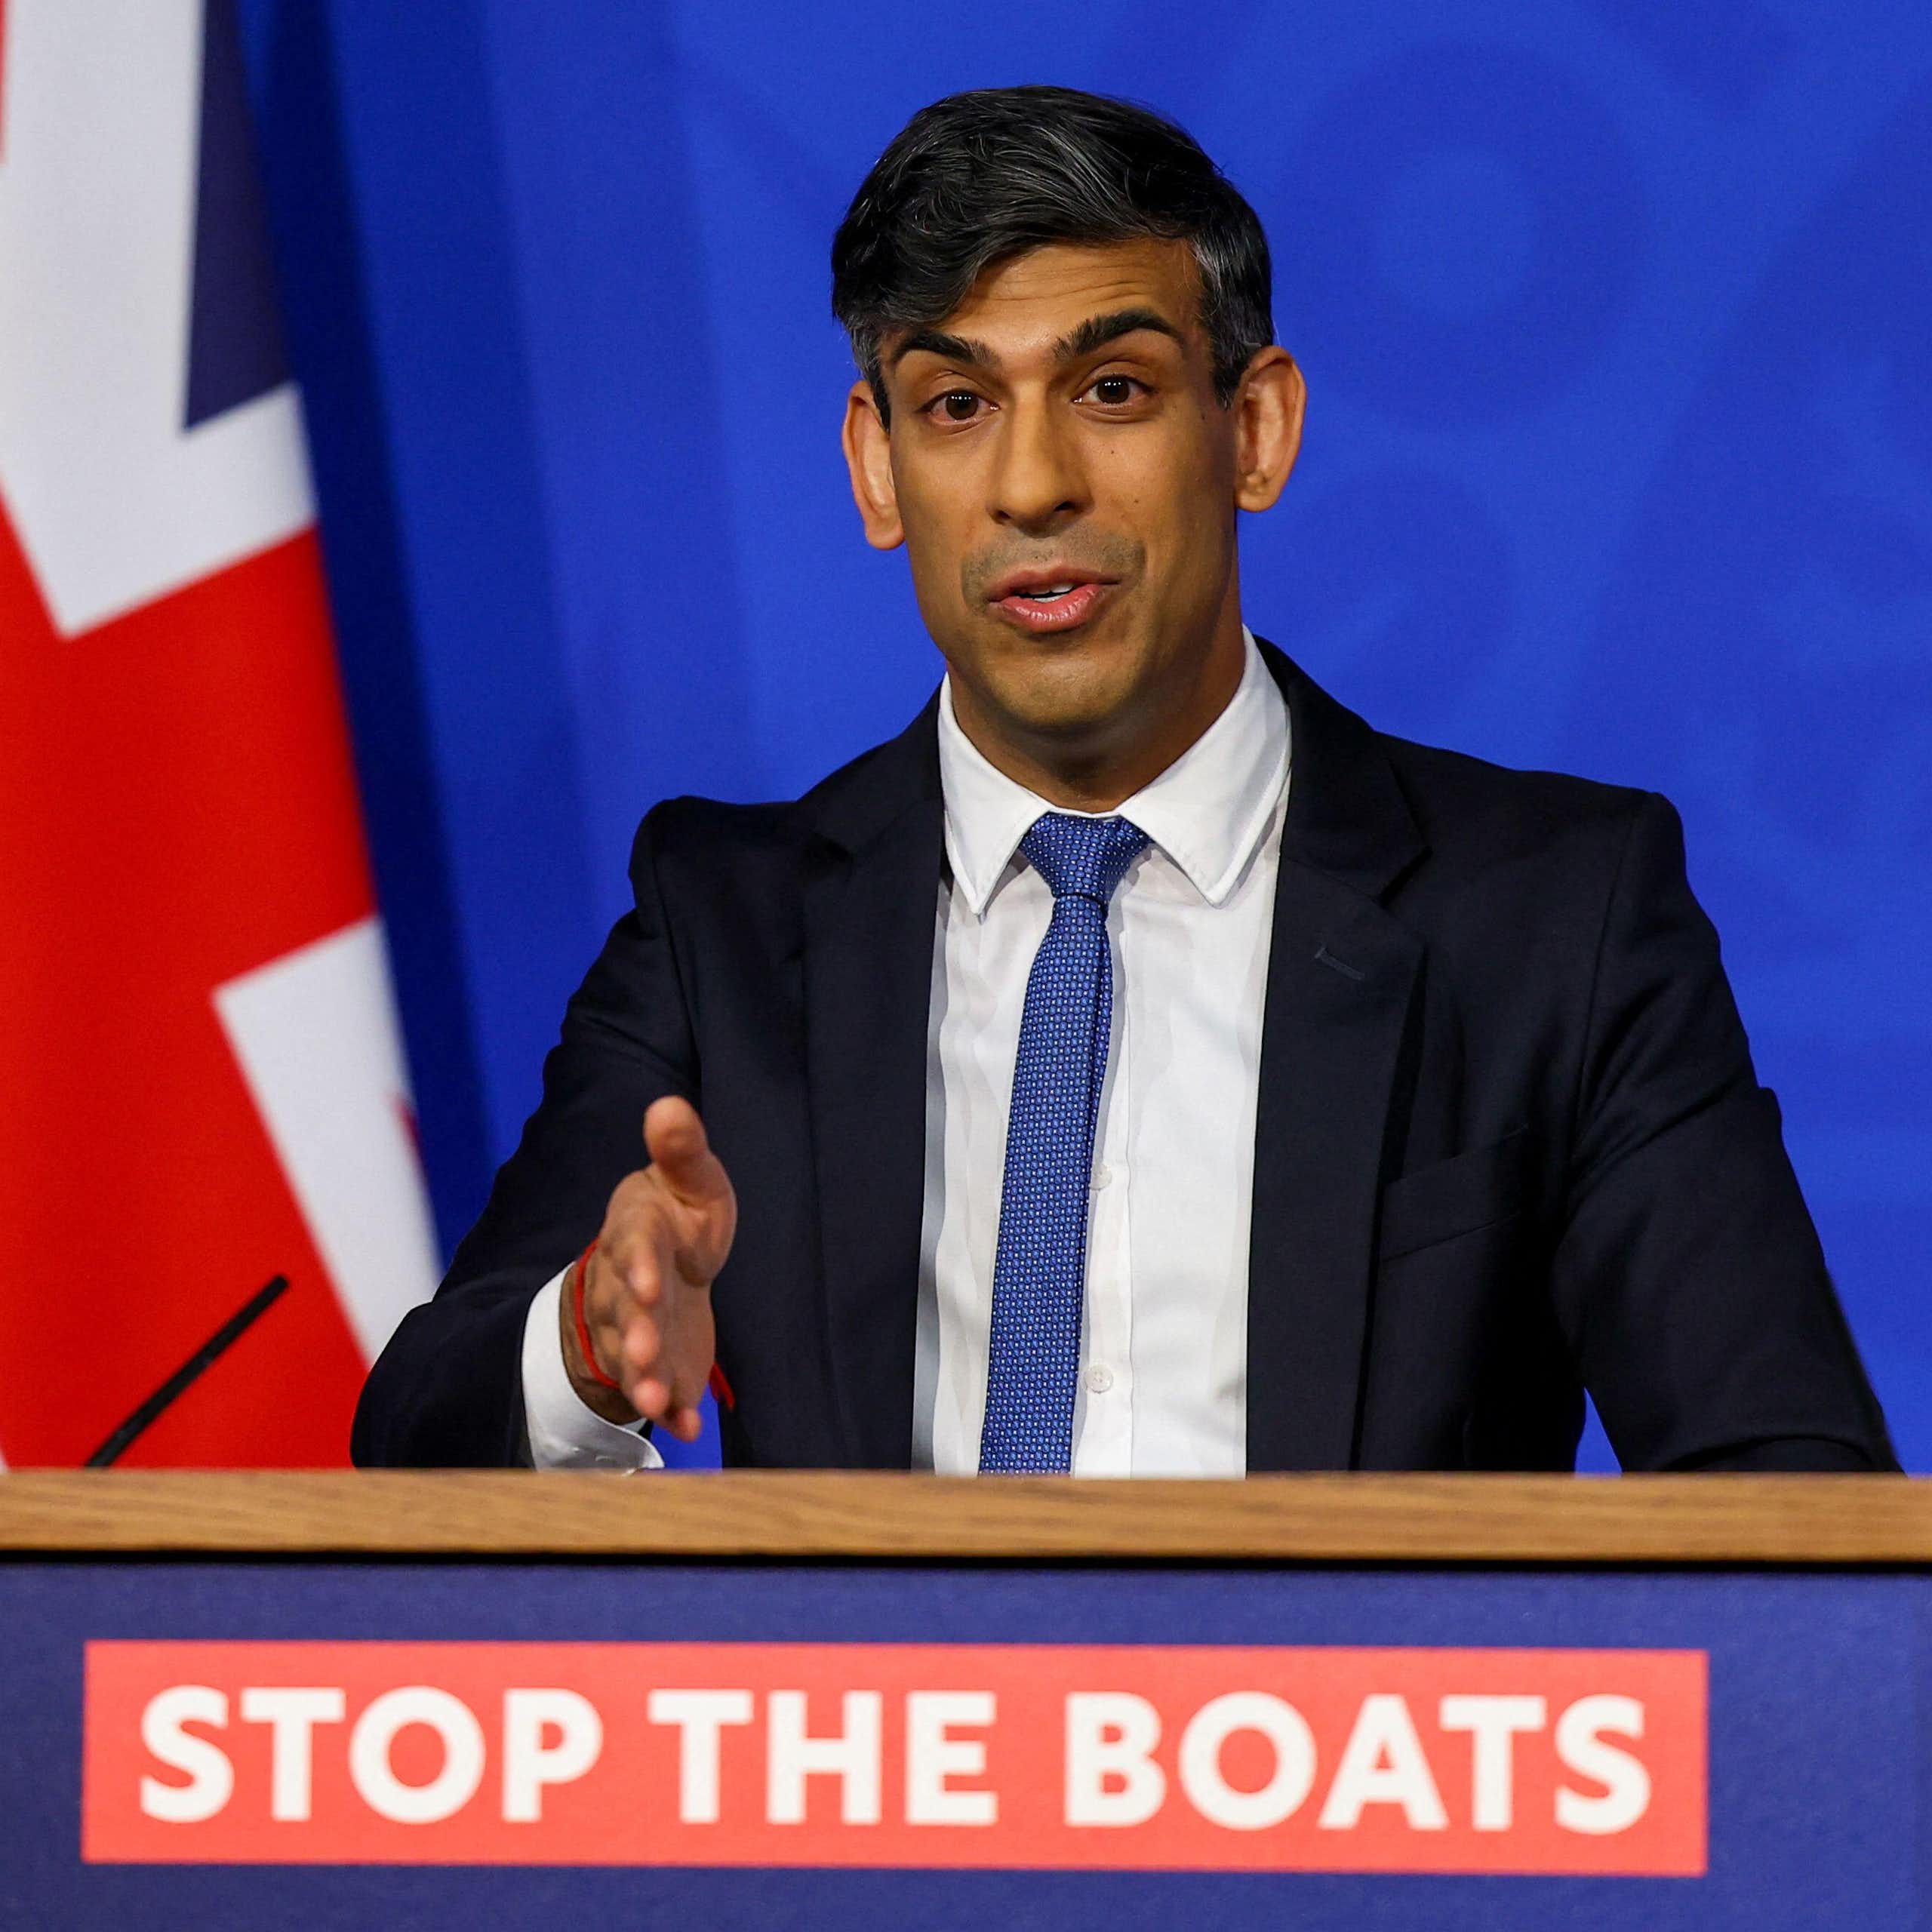 Rishi Sunak speaking and gesturing decisively at a podium that reads Stop the Boats